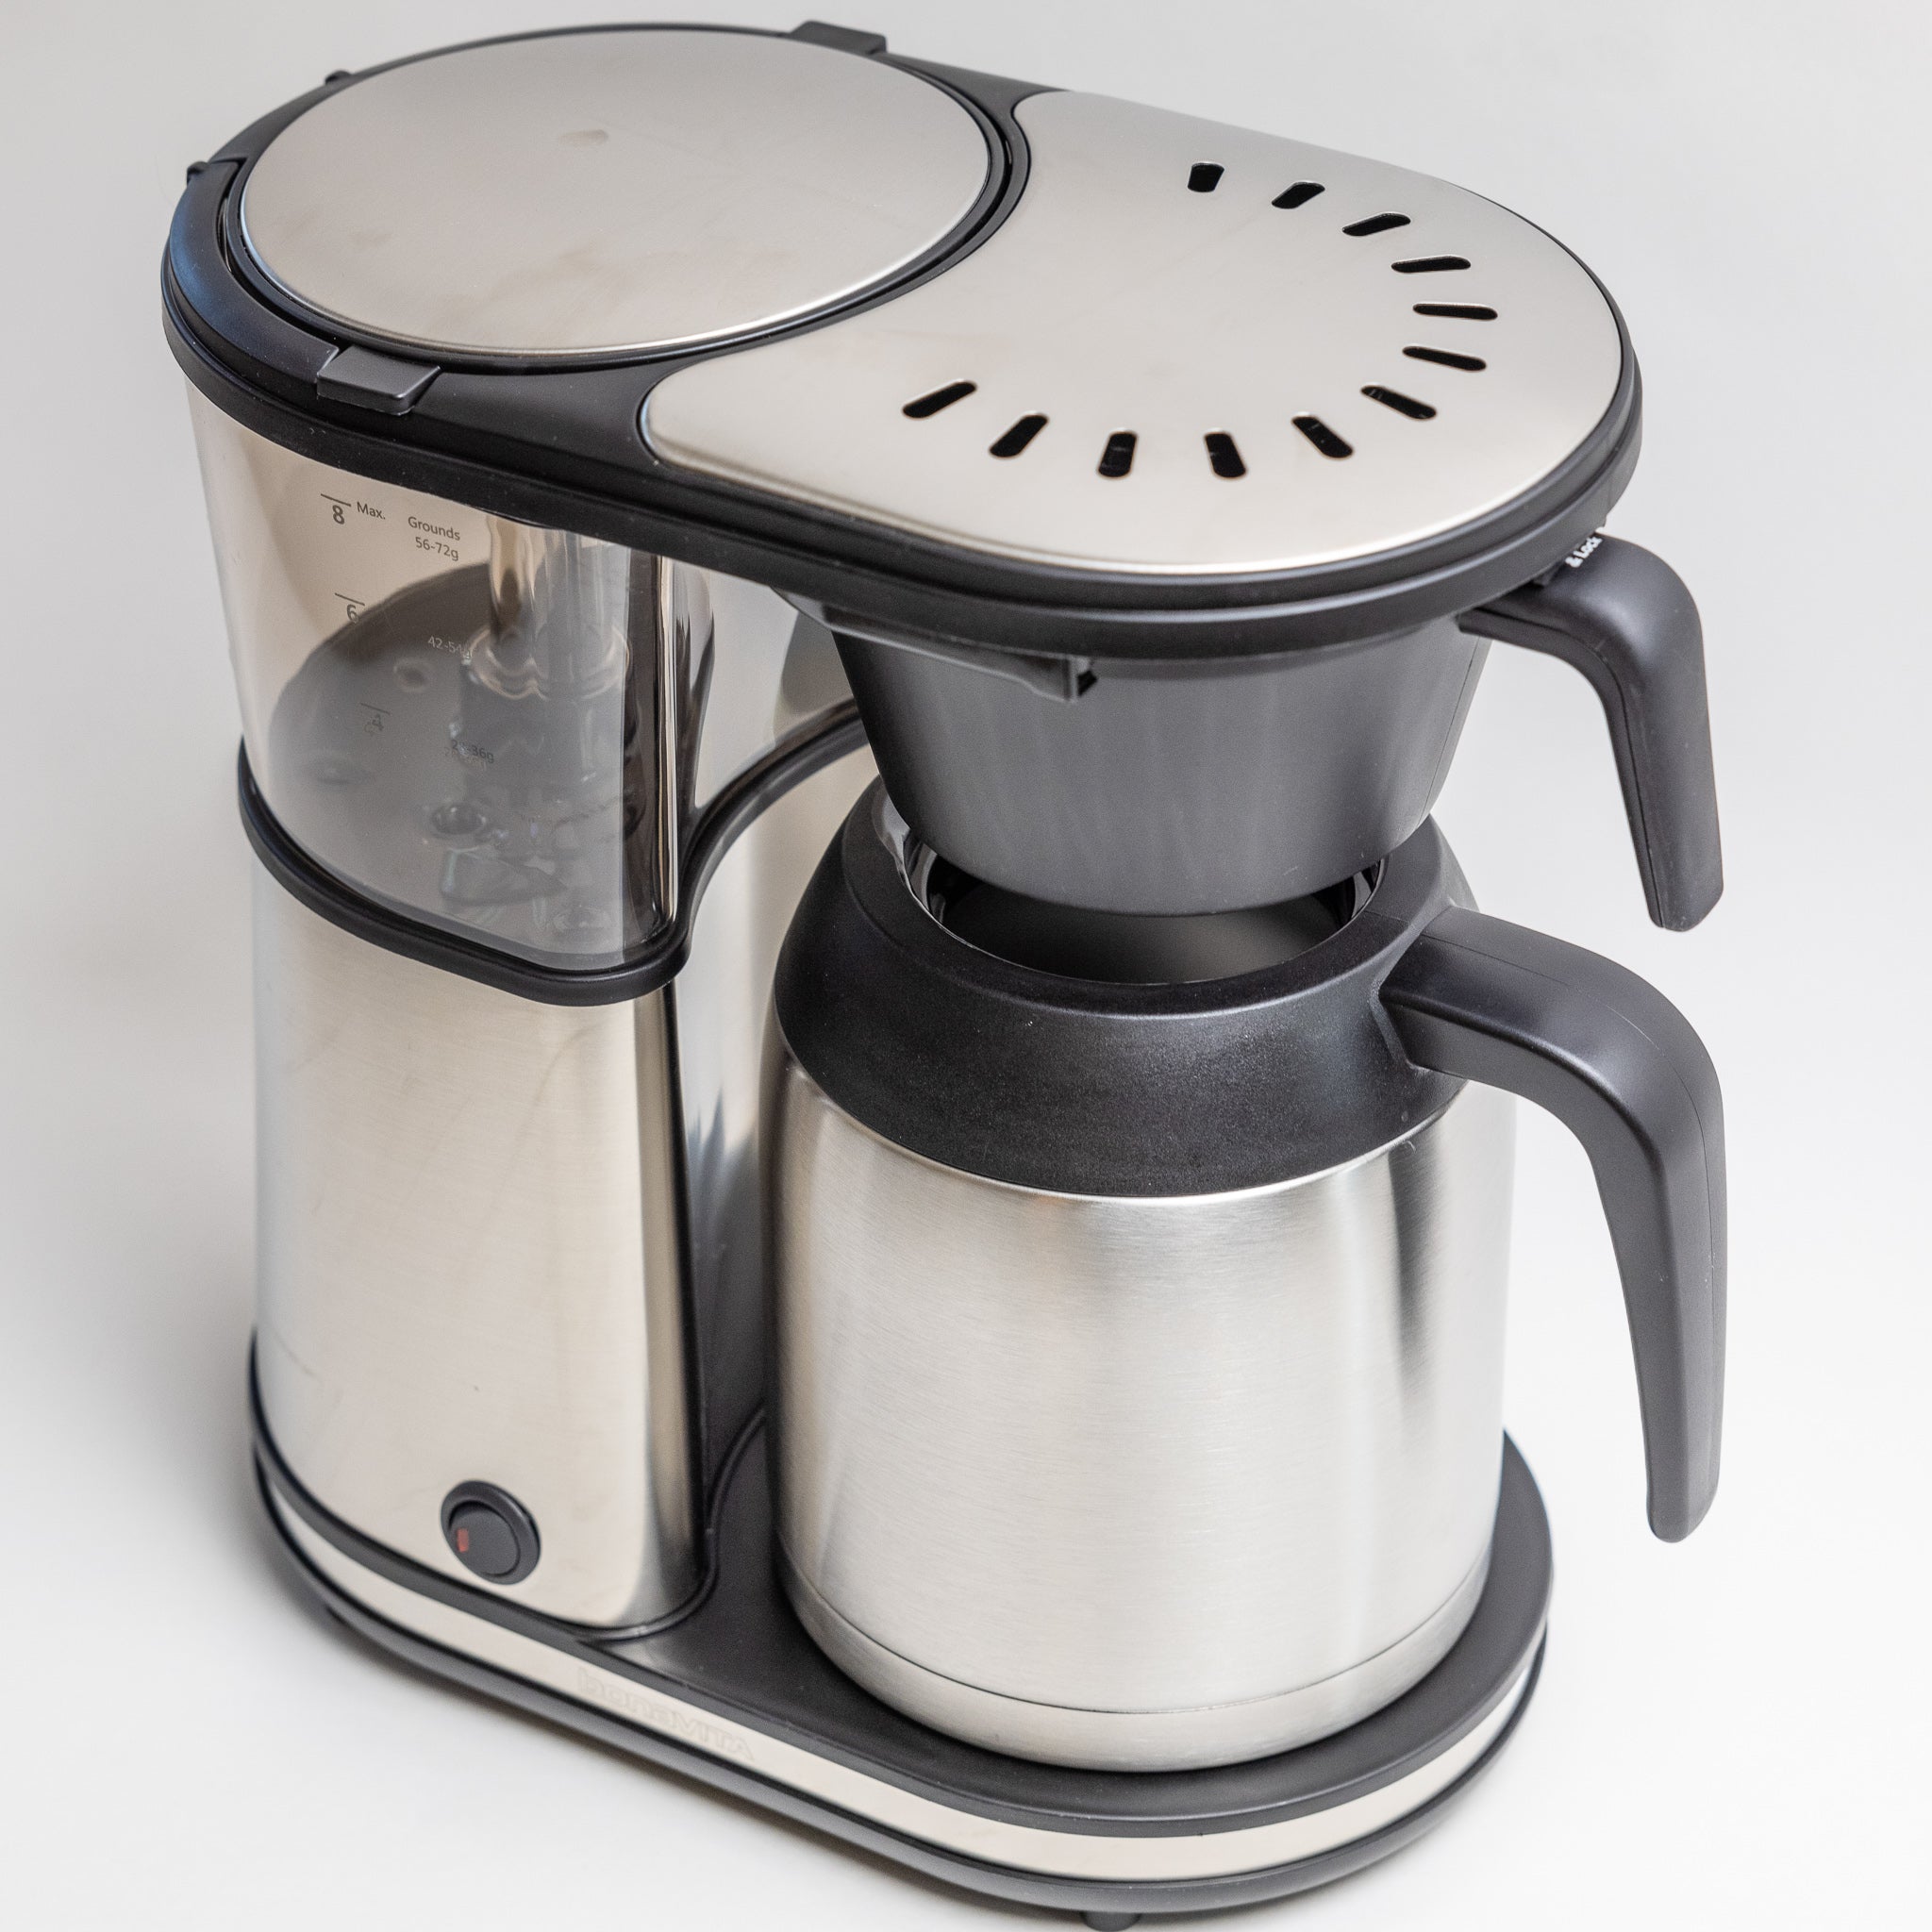 How to use the Bonavita 8 Cup One Touch Coffee Maker 